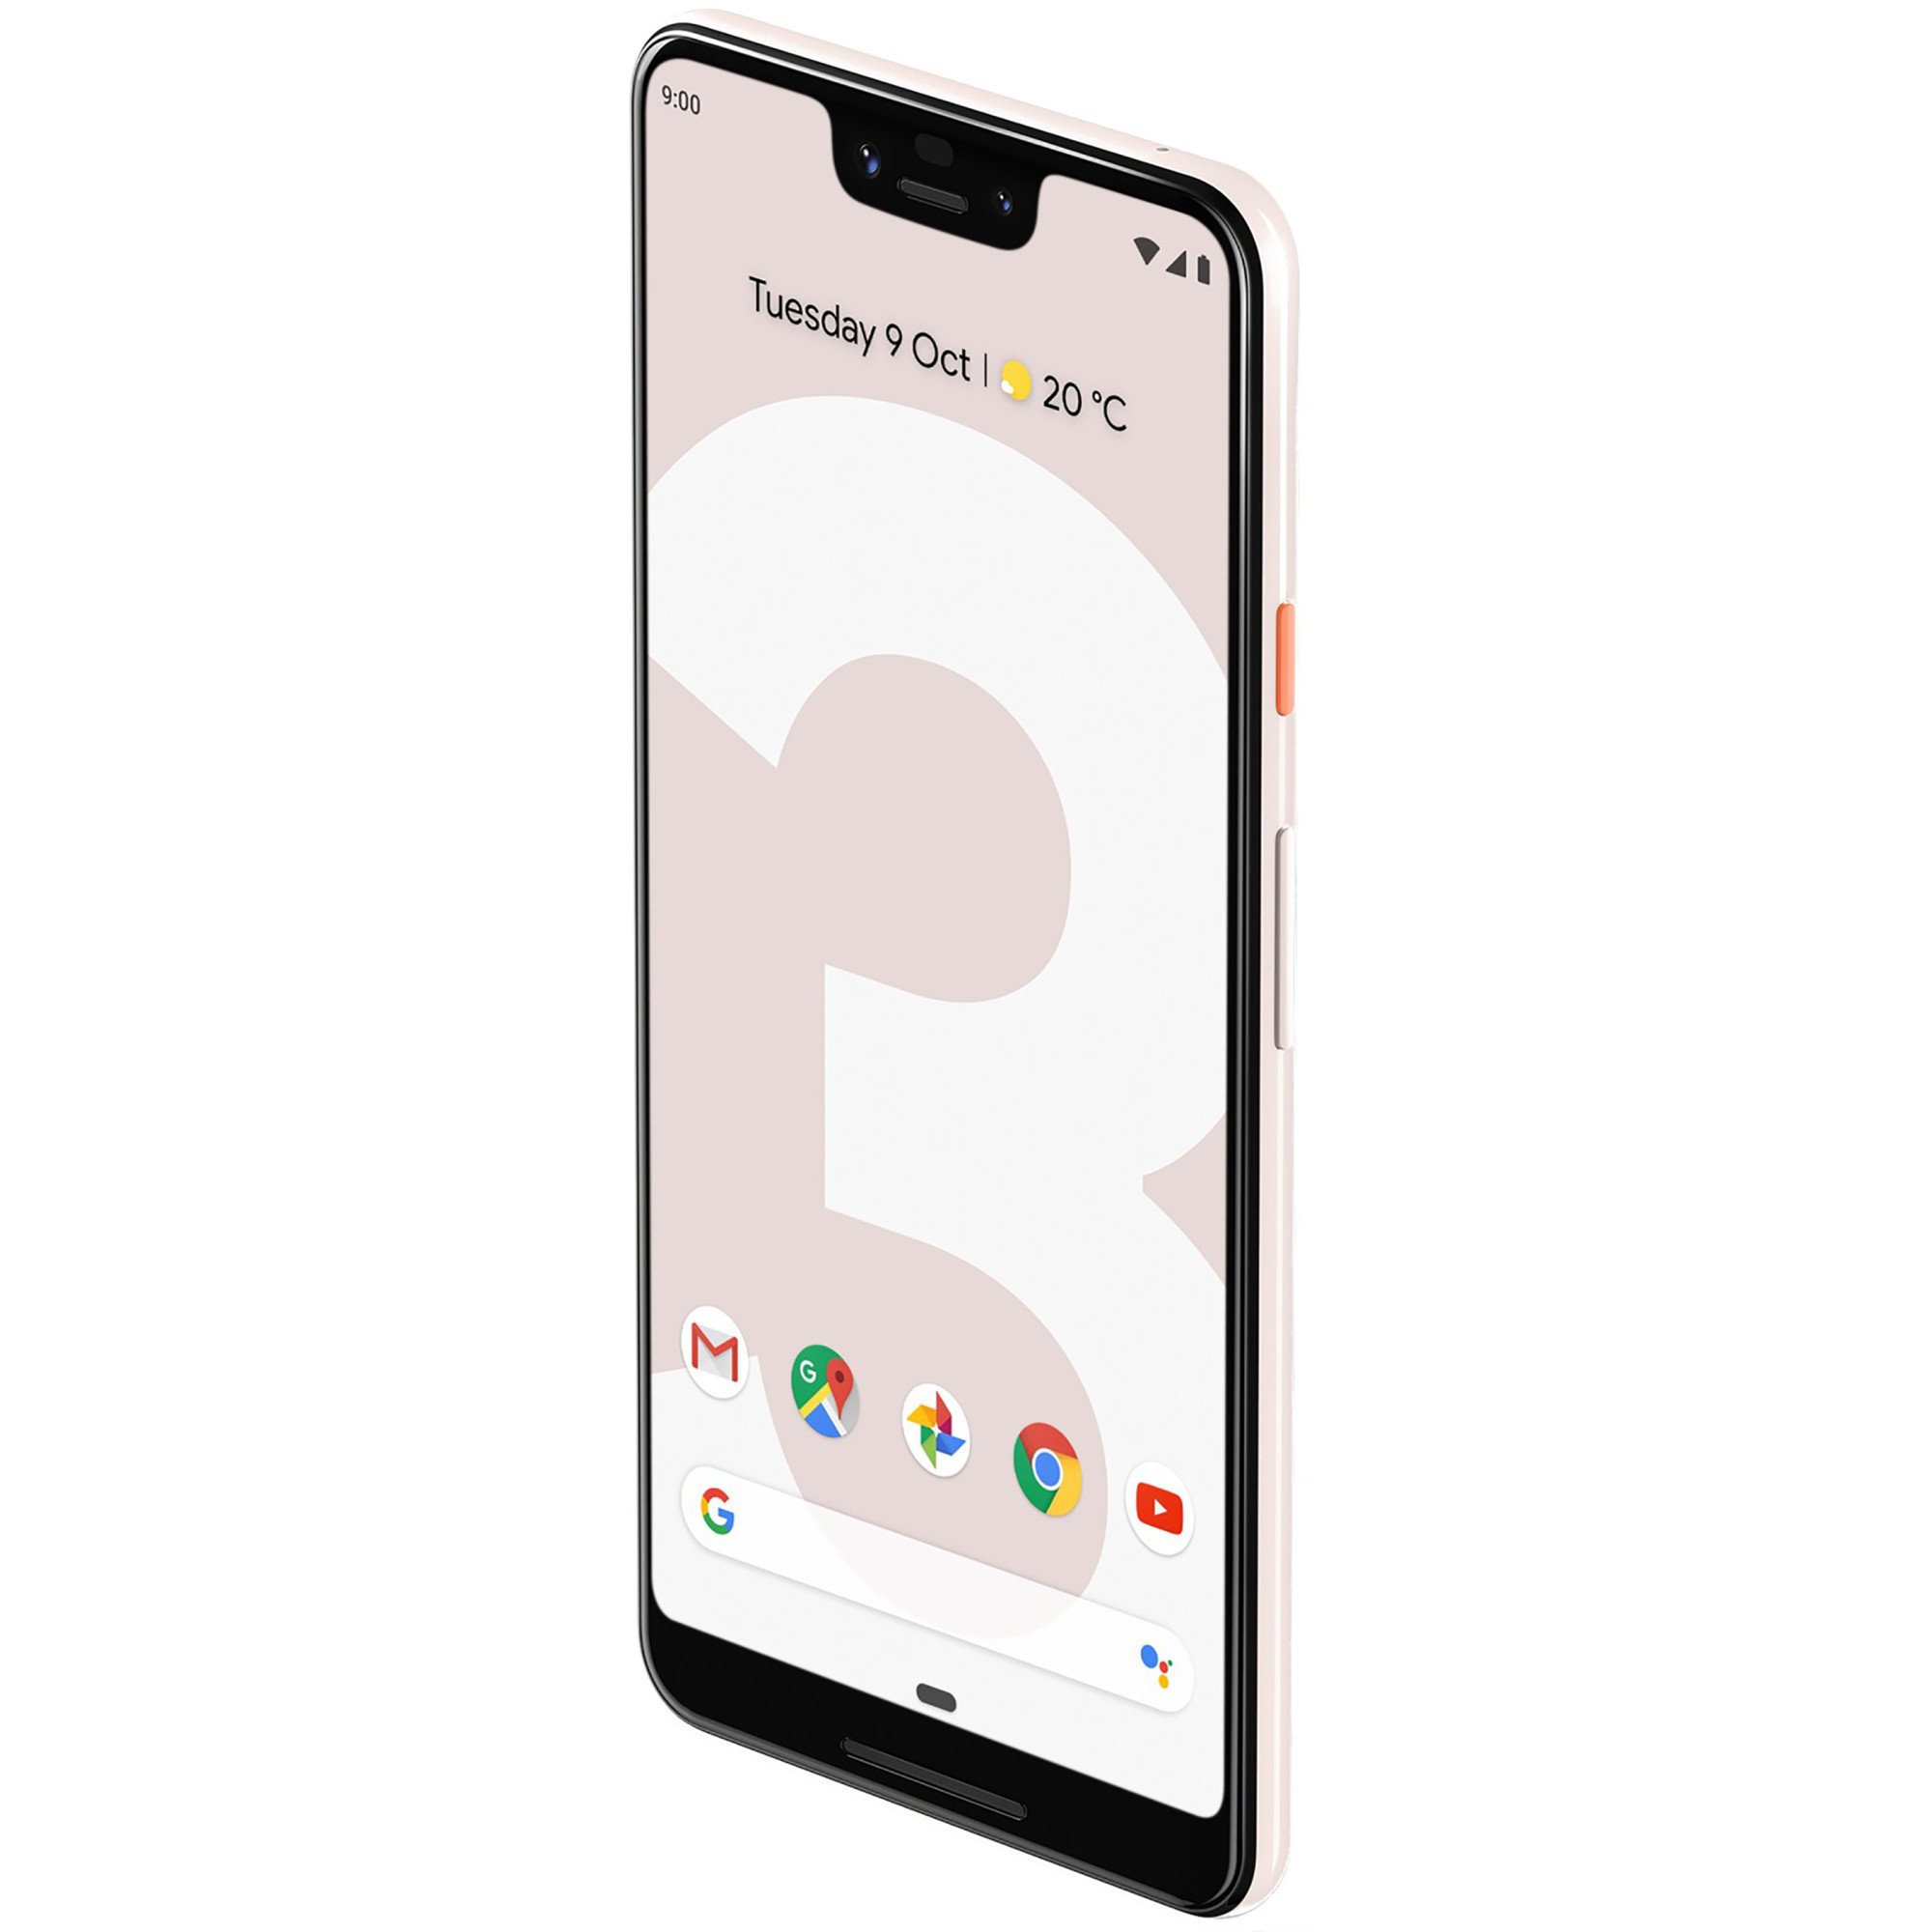 Google Pixel 3XL 64GB Pink (Unlocked) Excellent Condition - image 3 of 4